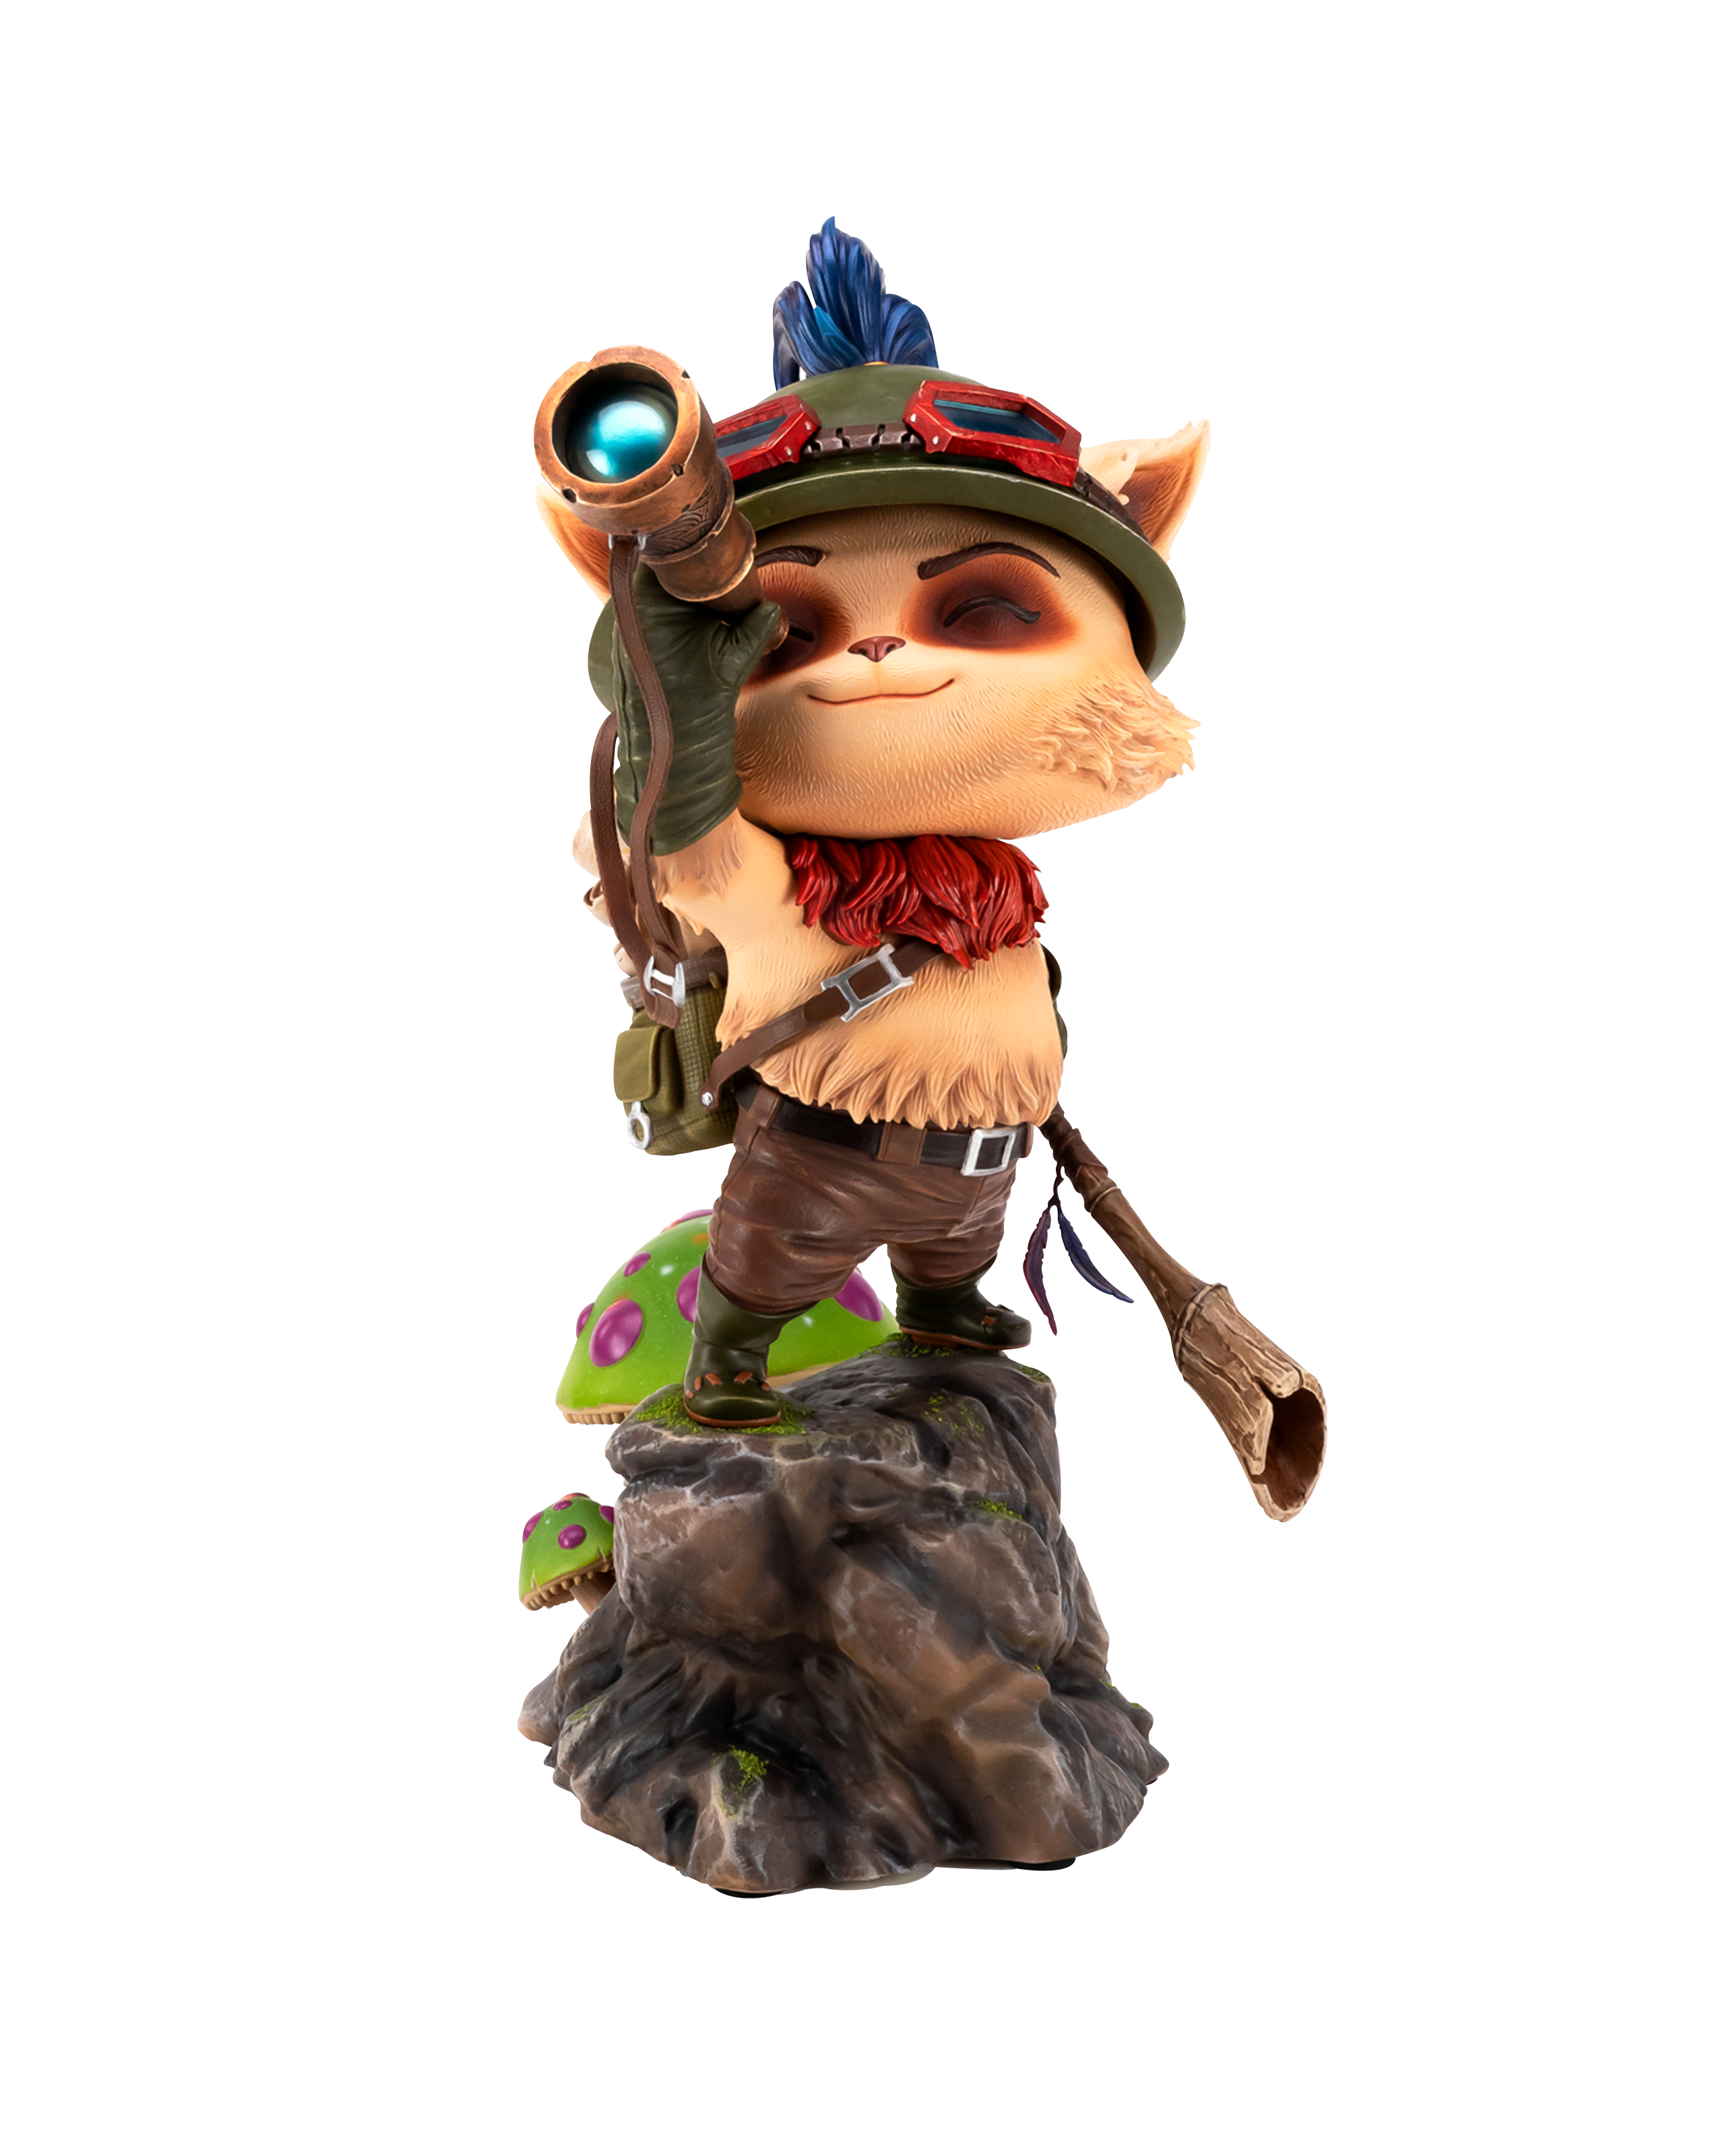 Used* 2013 Riot Games League Of Legends Teemo Scouts The World figurine  figure